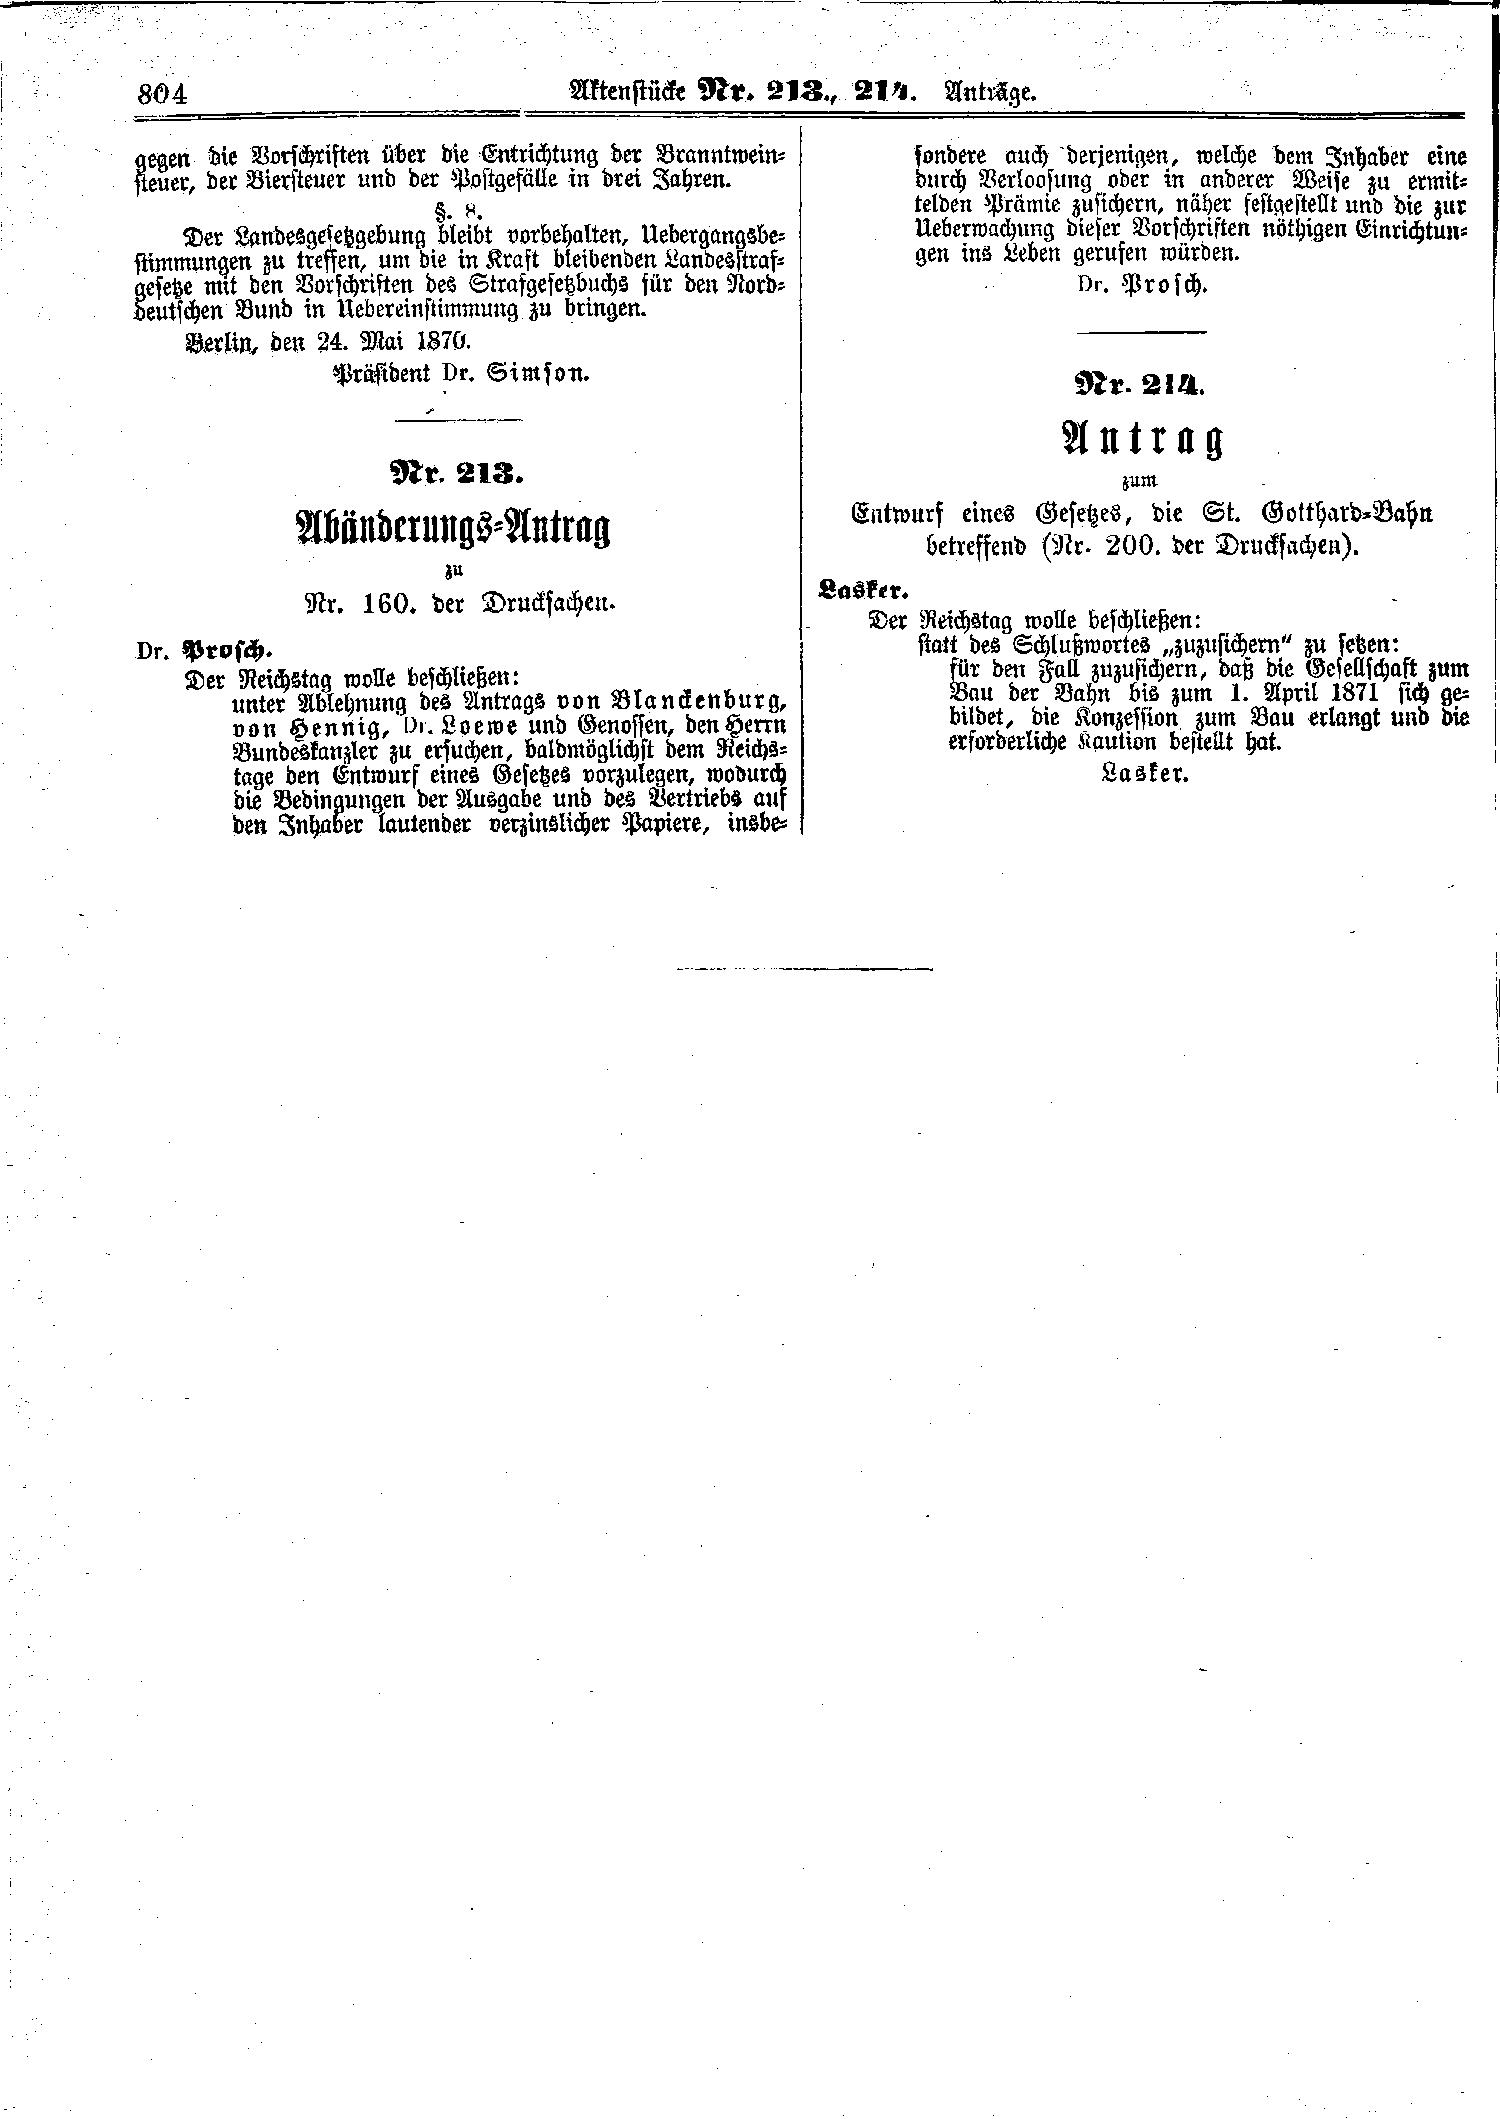 Scan of page 804